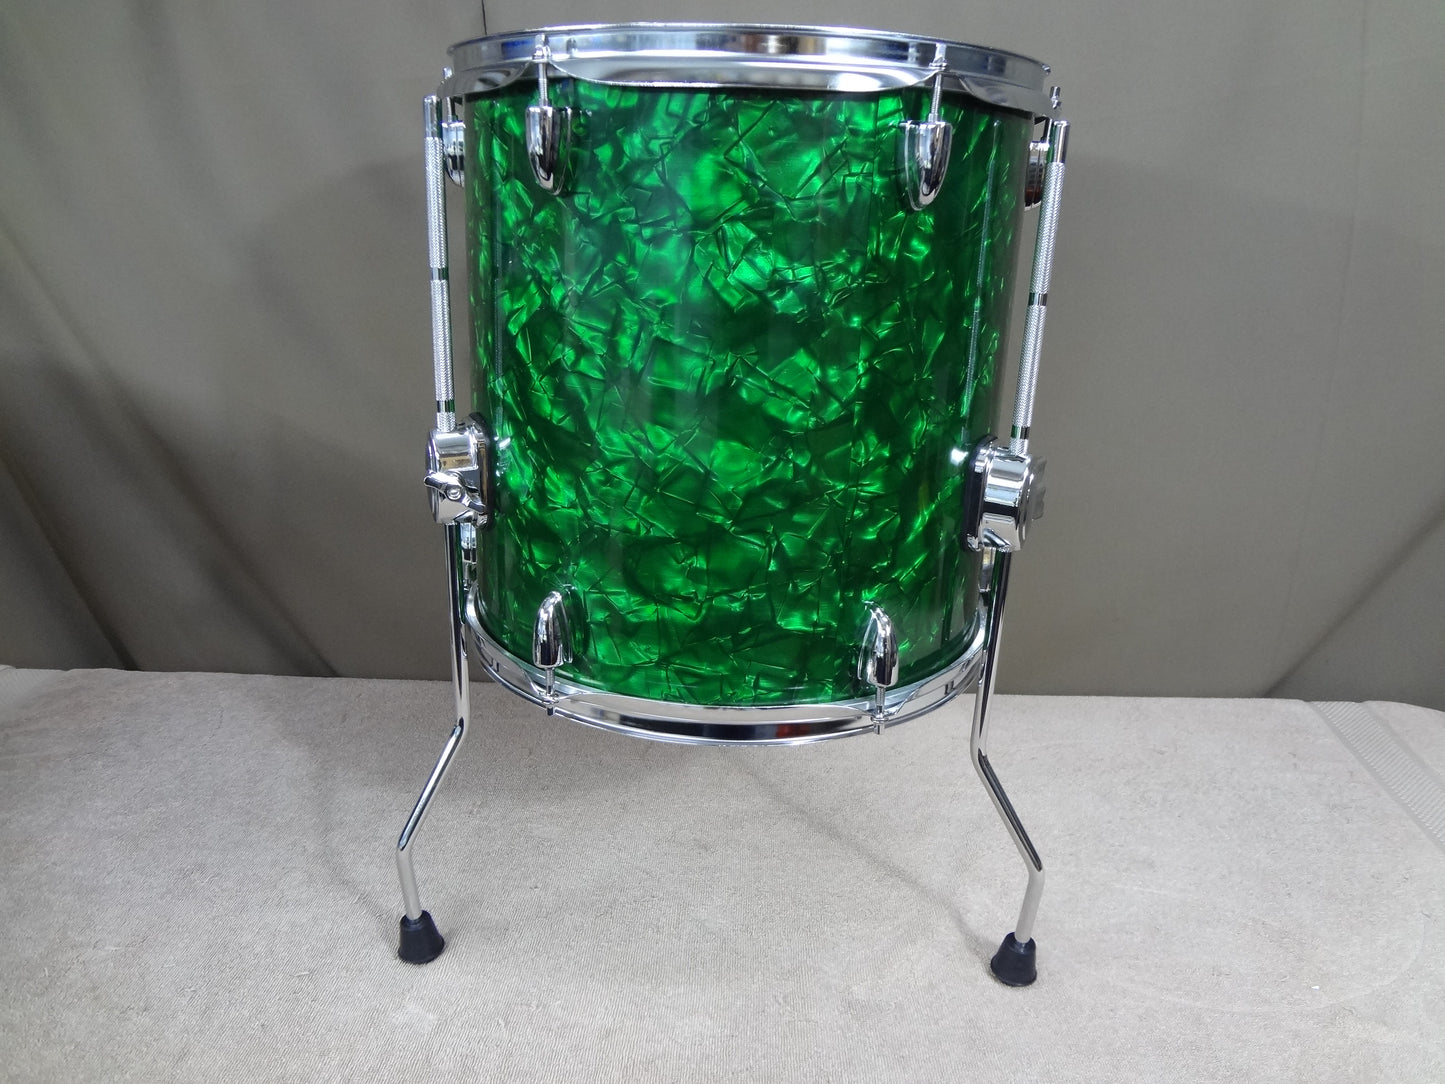 NEW 4 PIECE CUSTOM HYBRID ELECTRONIC/ACOUSTIC SHELL PACK - GREEN PEARL